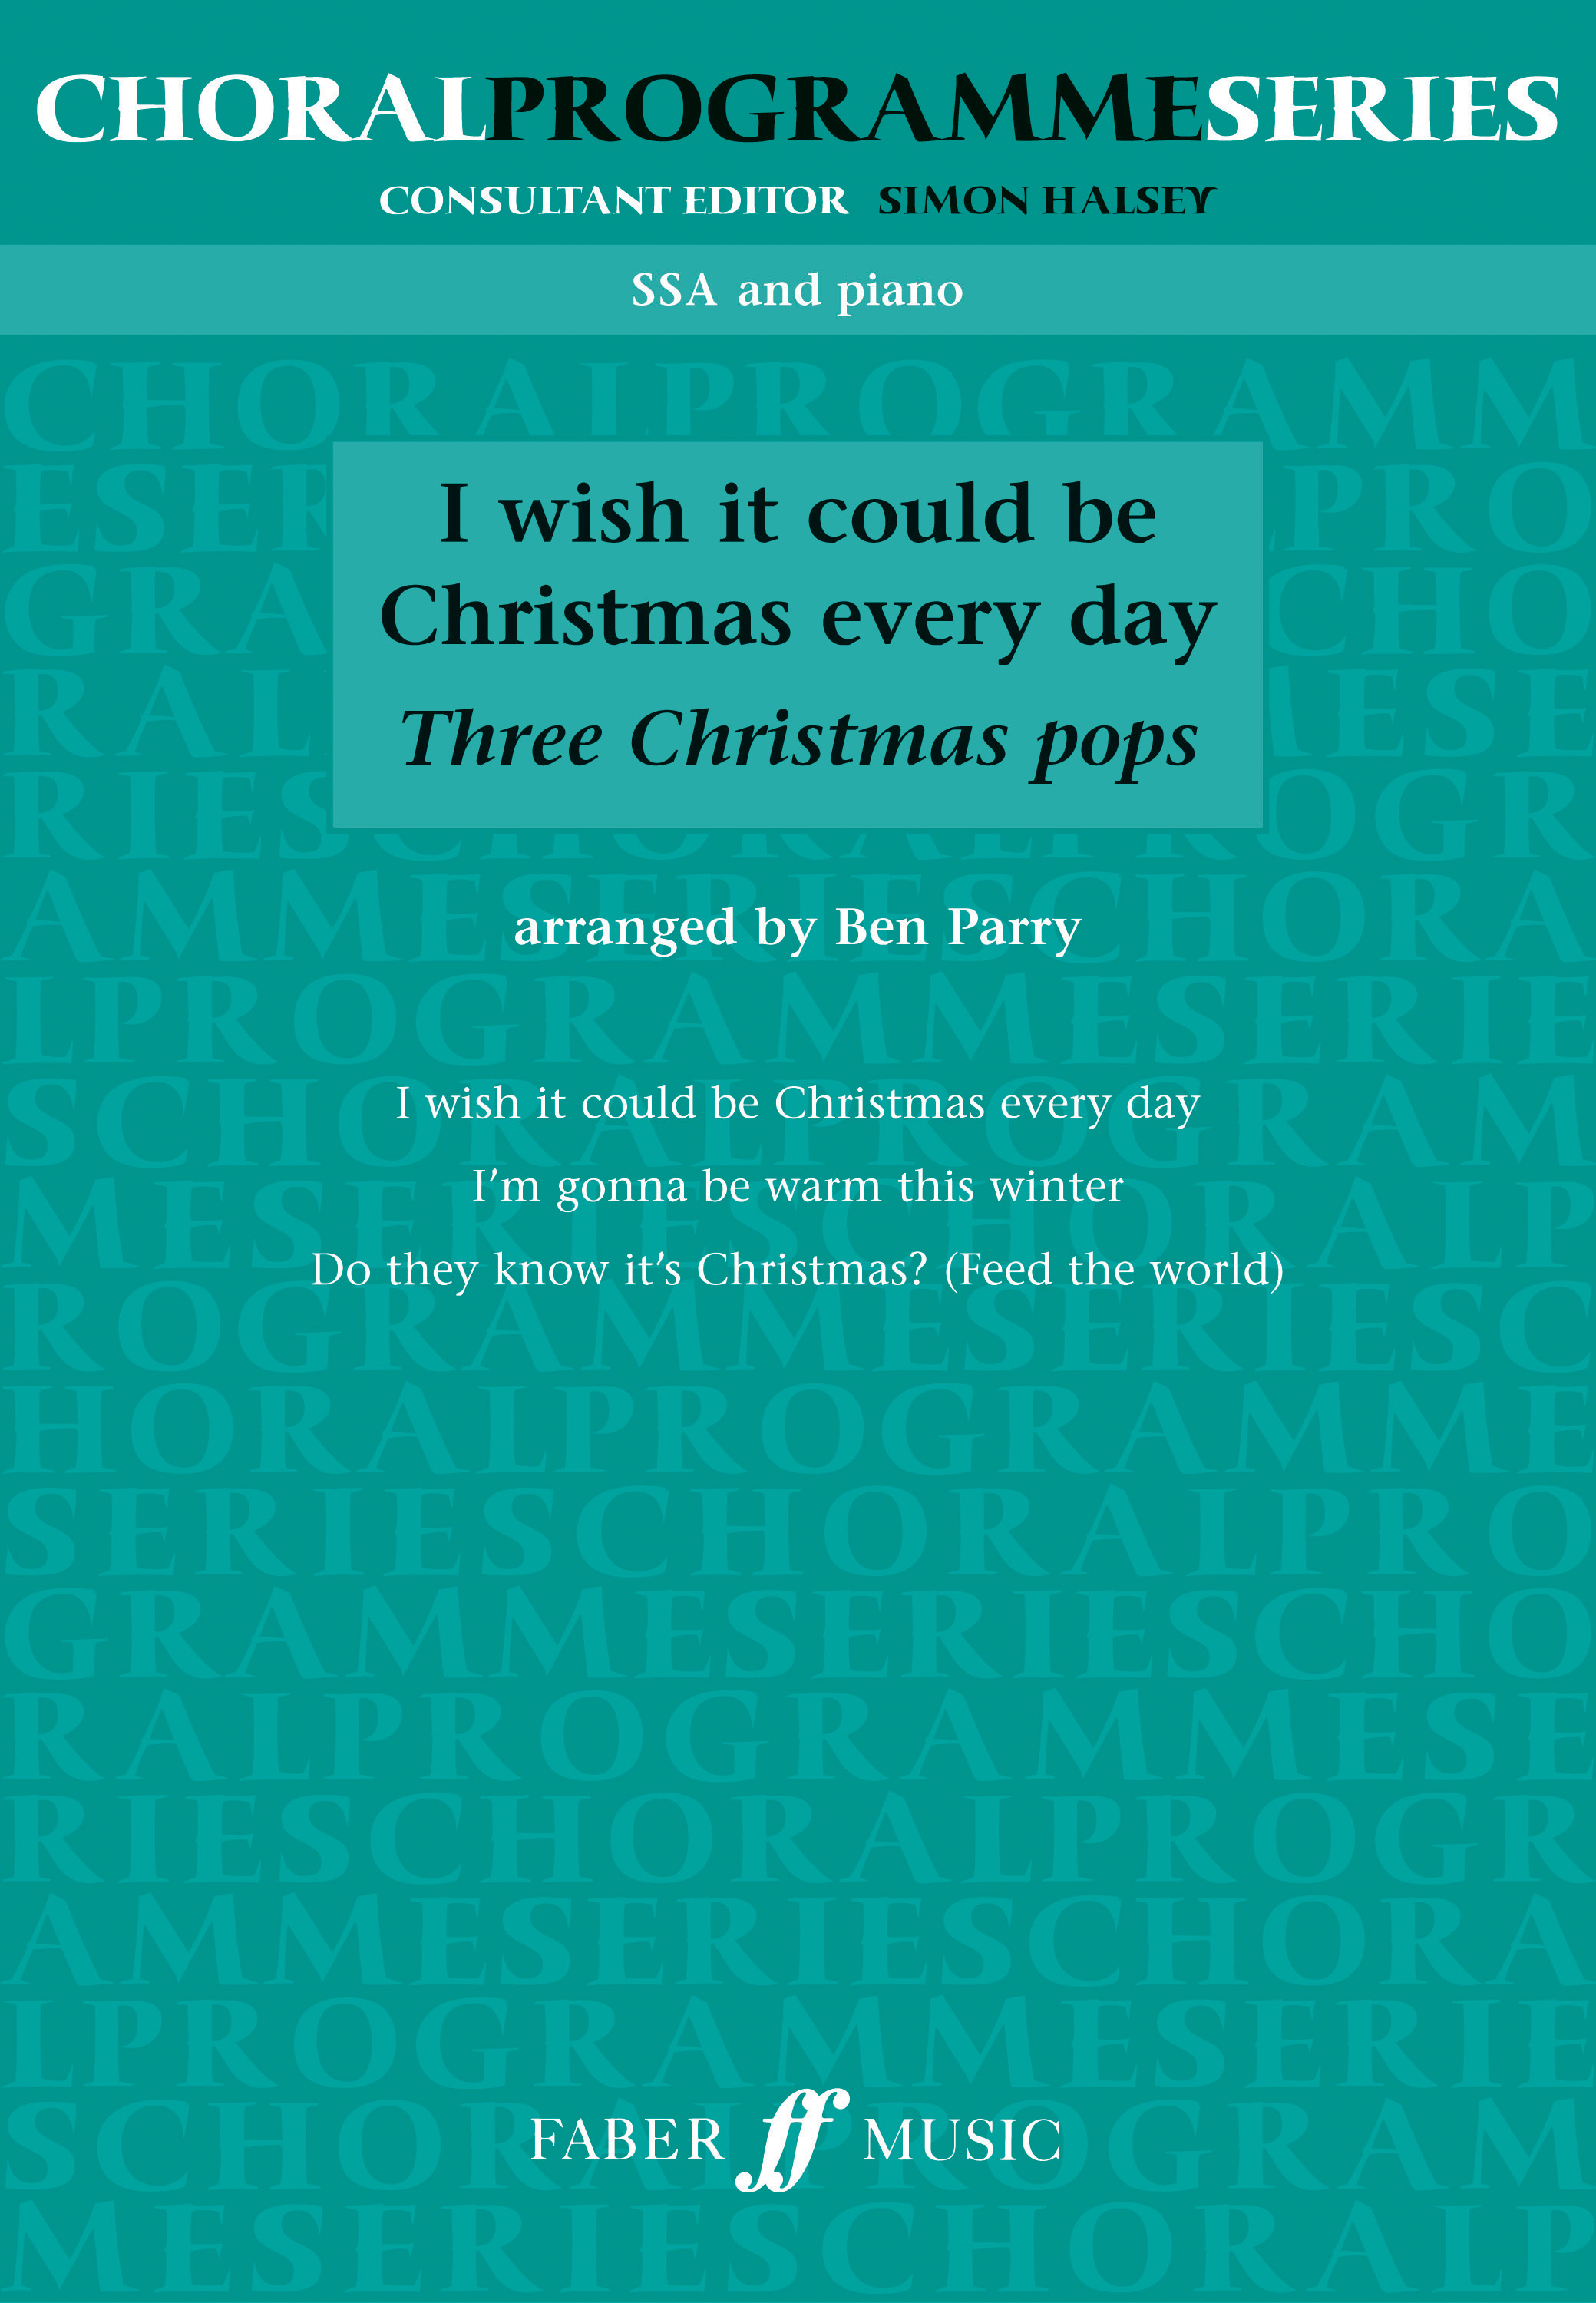 I Wish It Could Be Christmas Every Day (PARRY BEN)